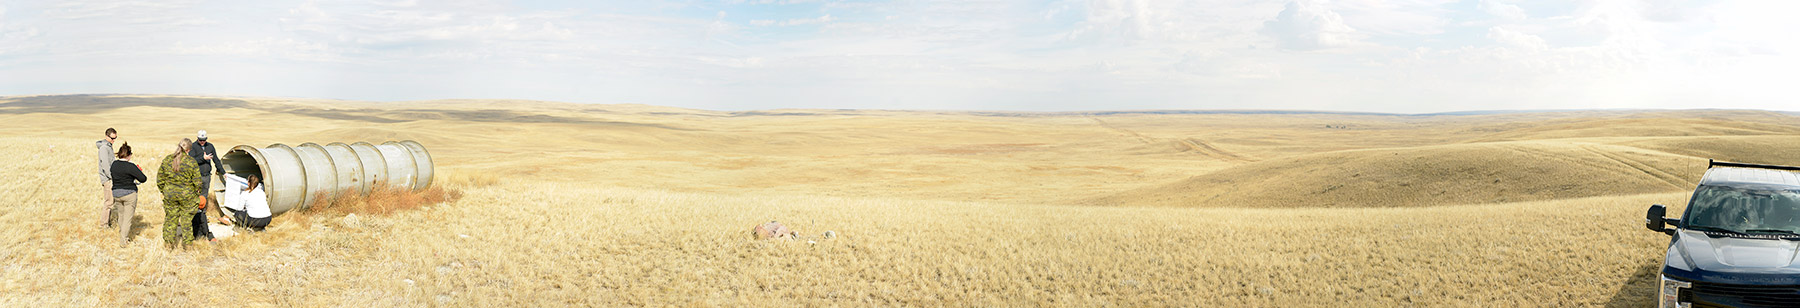 Panoramic photo of a rolling landscape with yellow fields under a blue sky. Military personnel in camo and researchers are seen by equipment on the left and a truck is parked on the far right